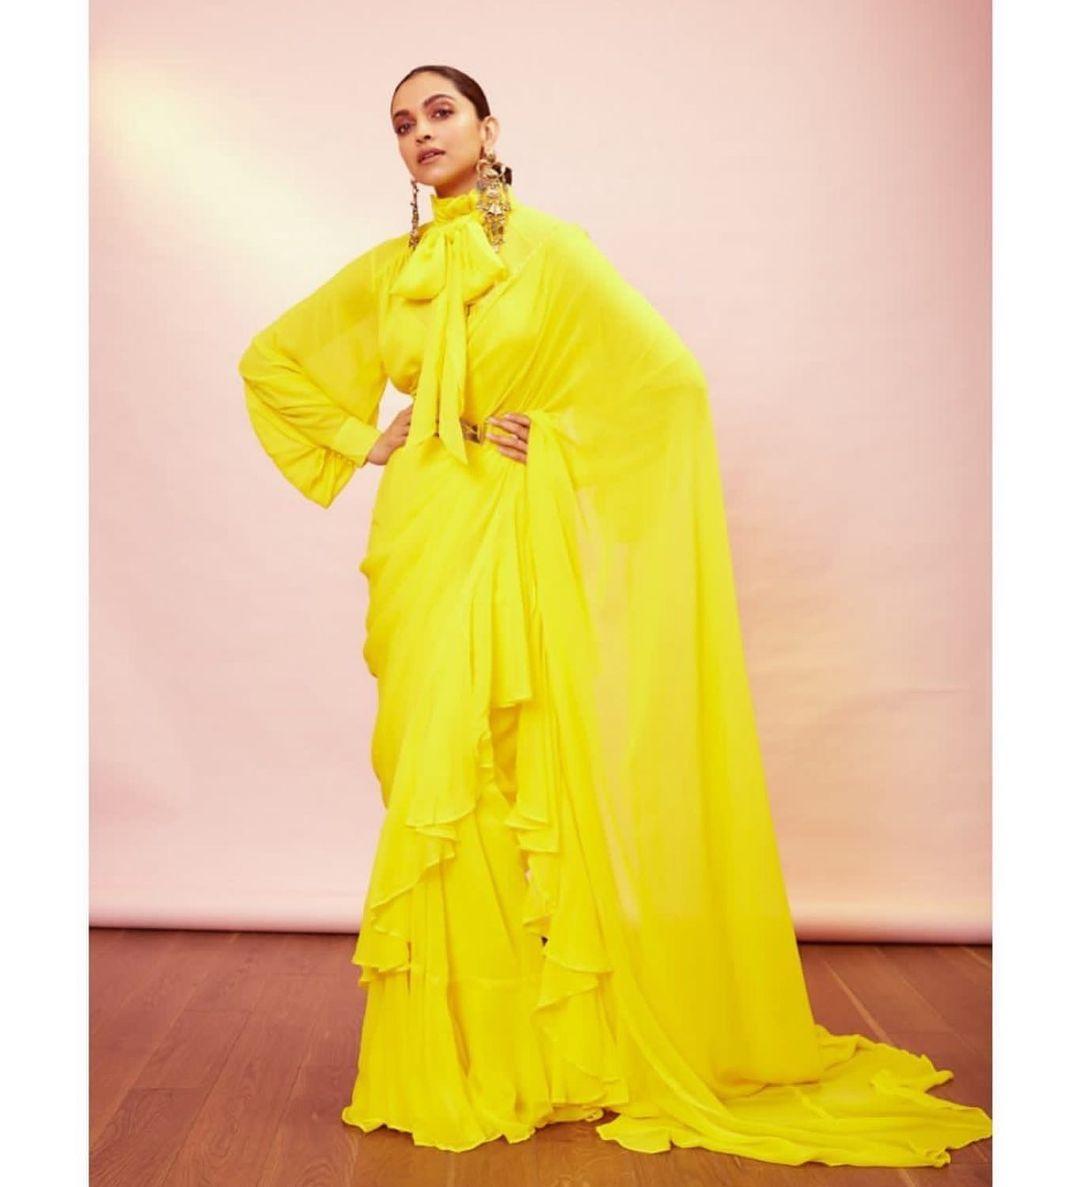 On the third day of Chaitra Navratri, consider wearing a vibrant yellow outfit like Deepika Padukone's. She chose a voluminous Sabyasachi saree in a cheerful pineapple yellow shade, ditching her usual power suits